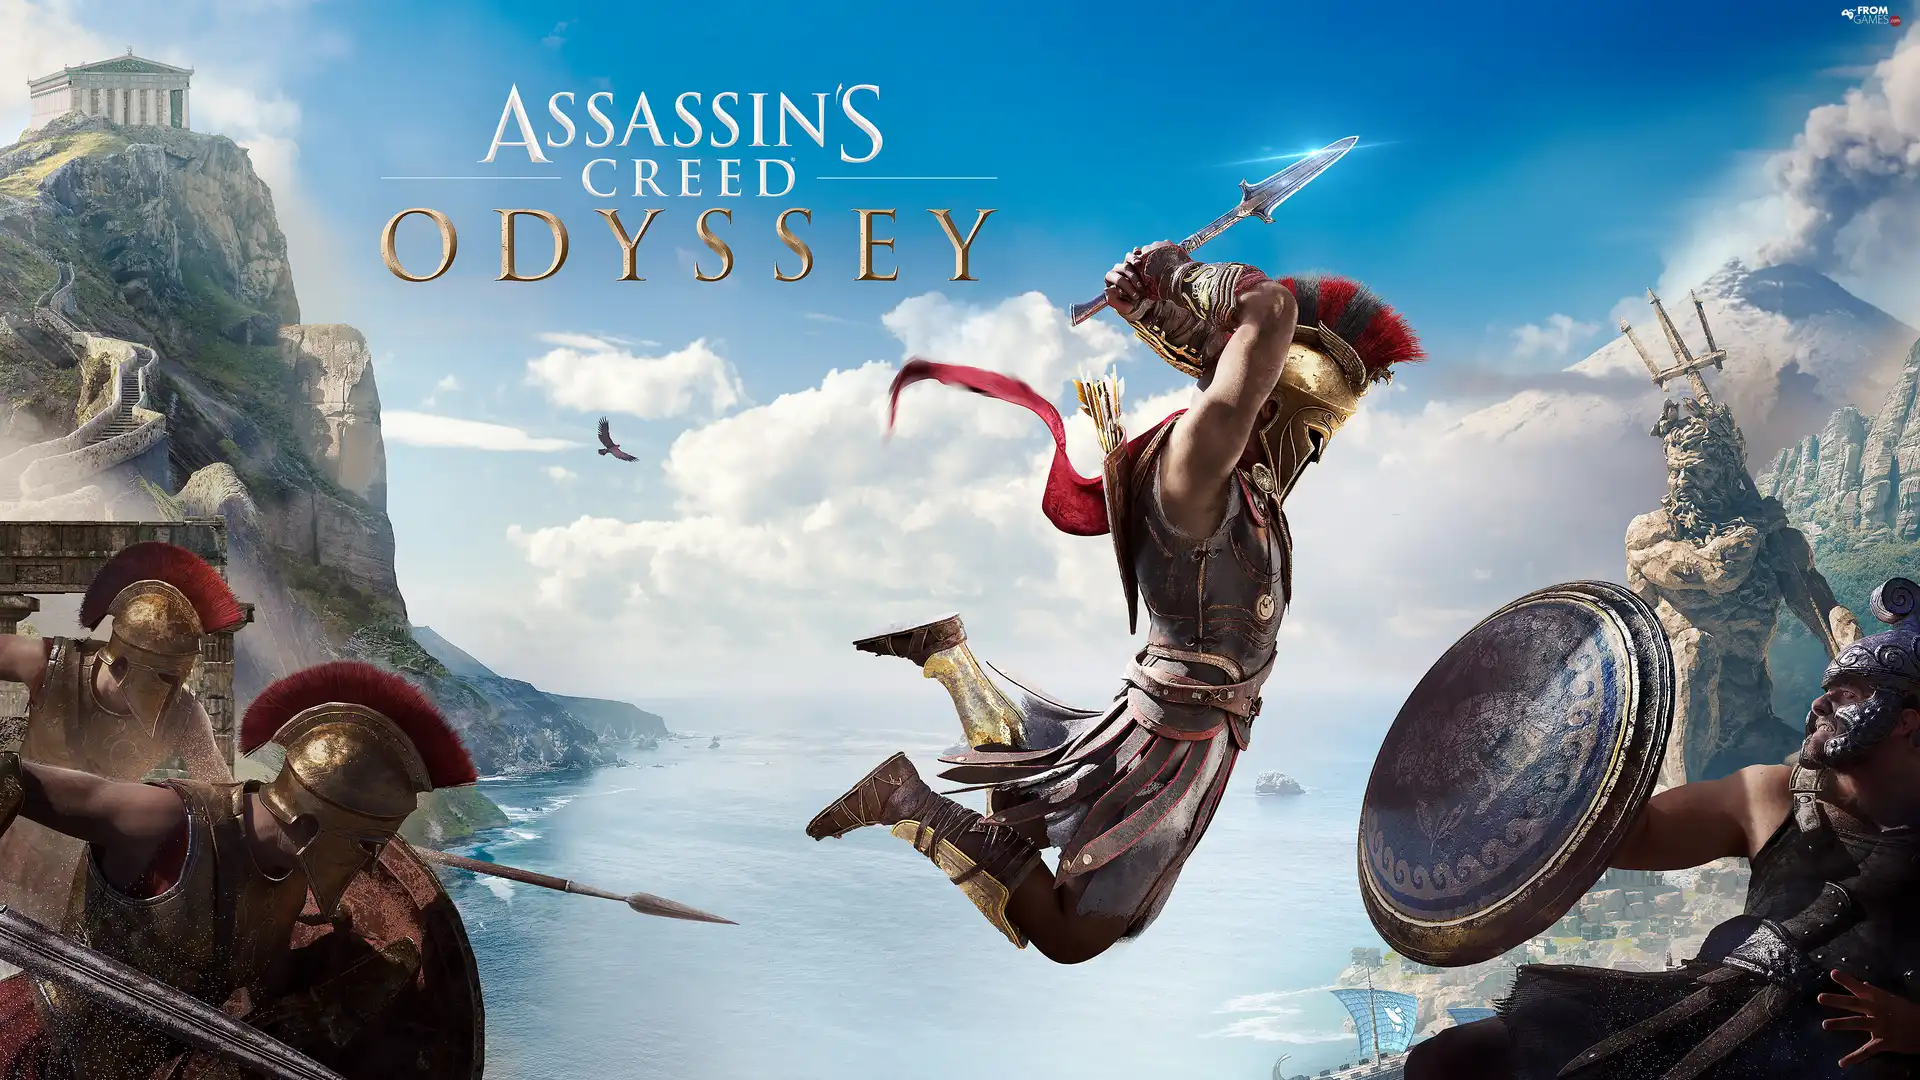 poster, Assassins Creed Odyssey, Alexios, game